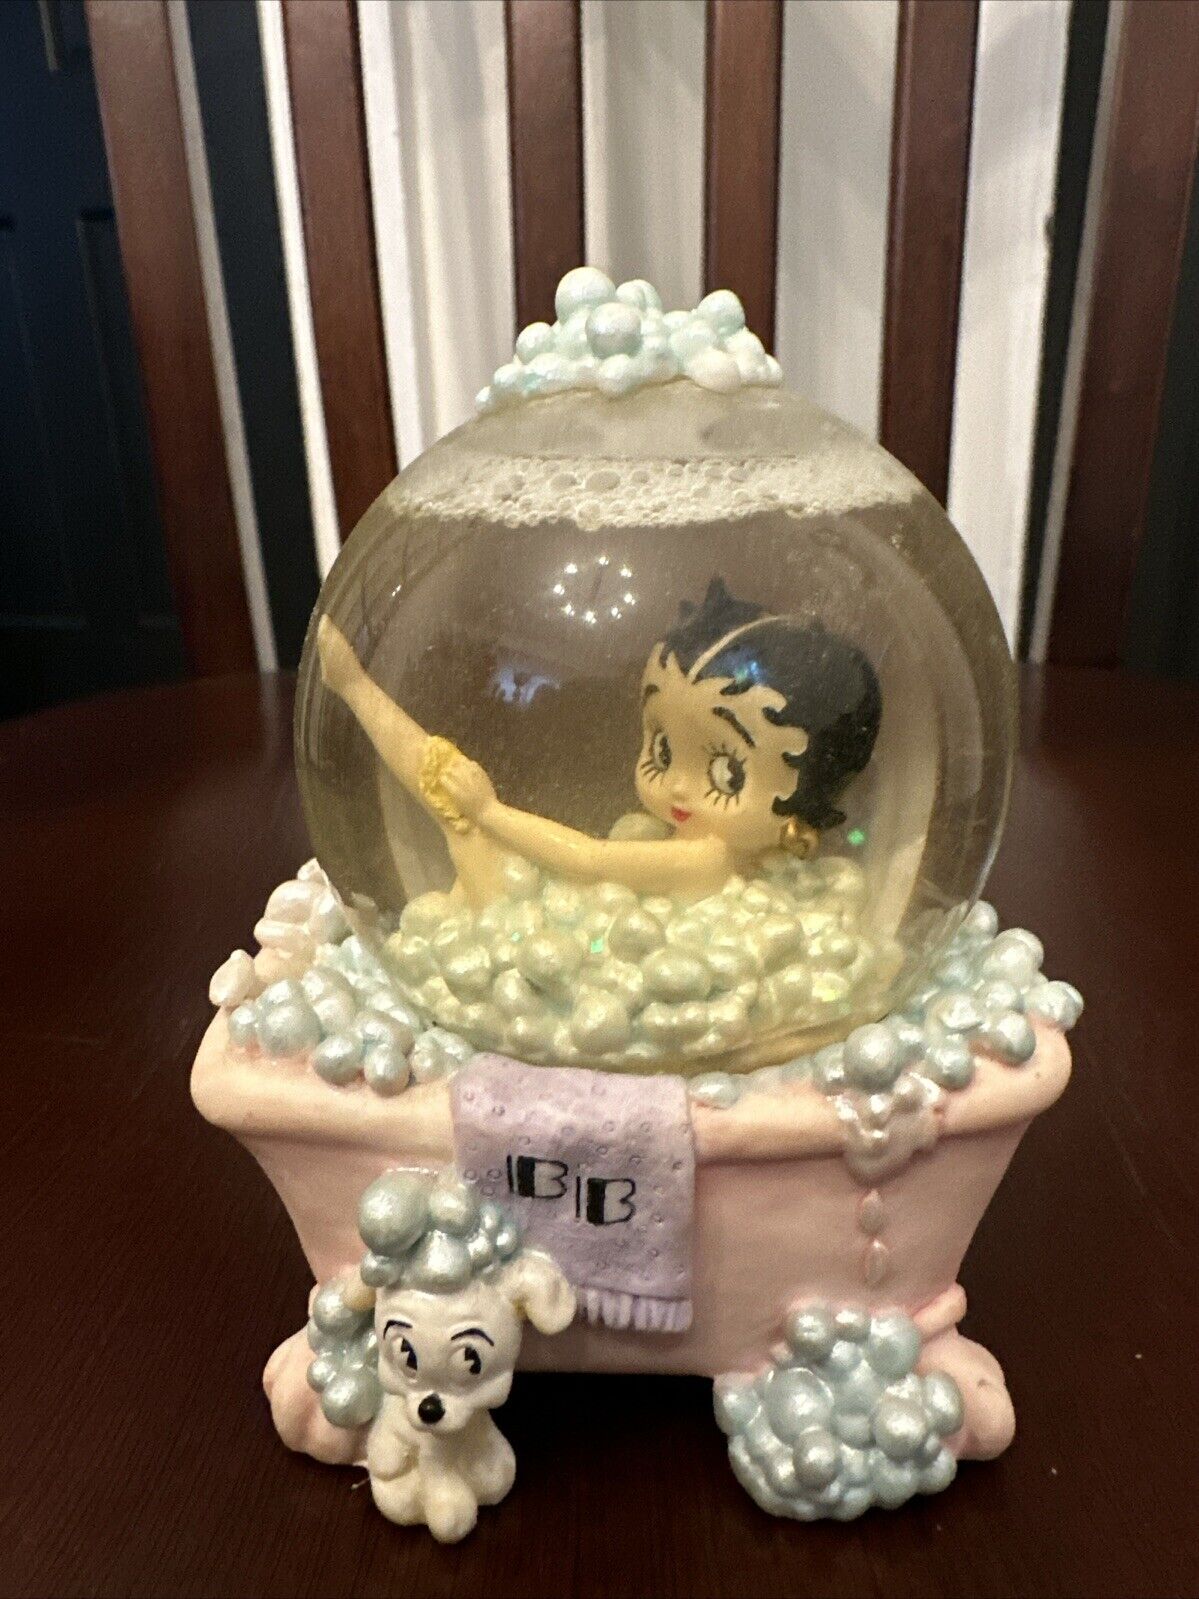 Vintage 1999 Betty Boop and pudgy the pup Bubble bath glass snow globe